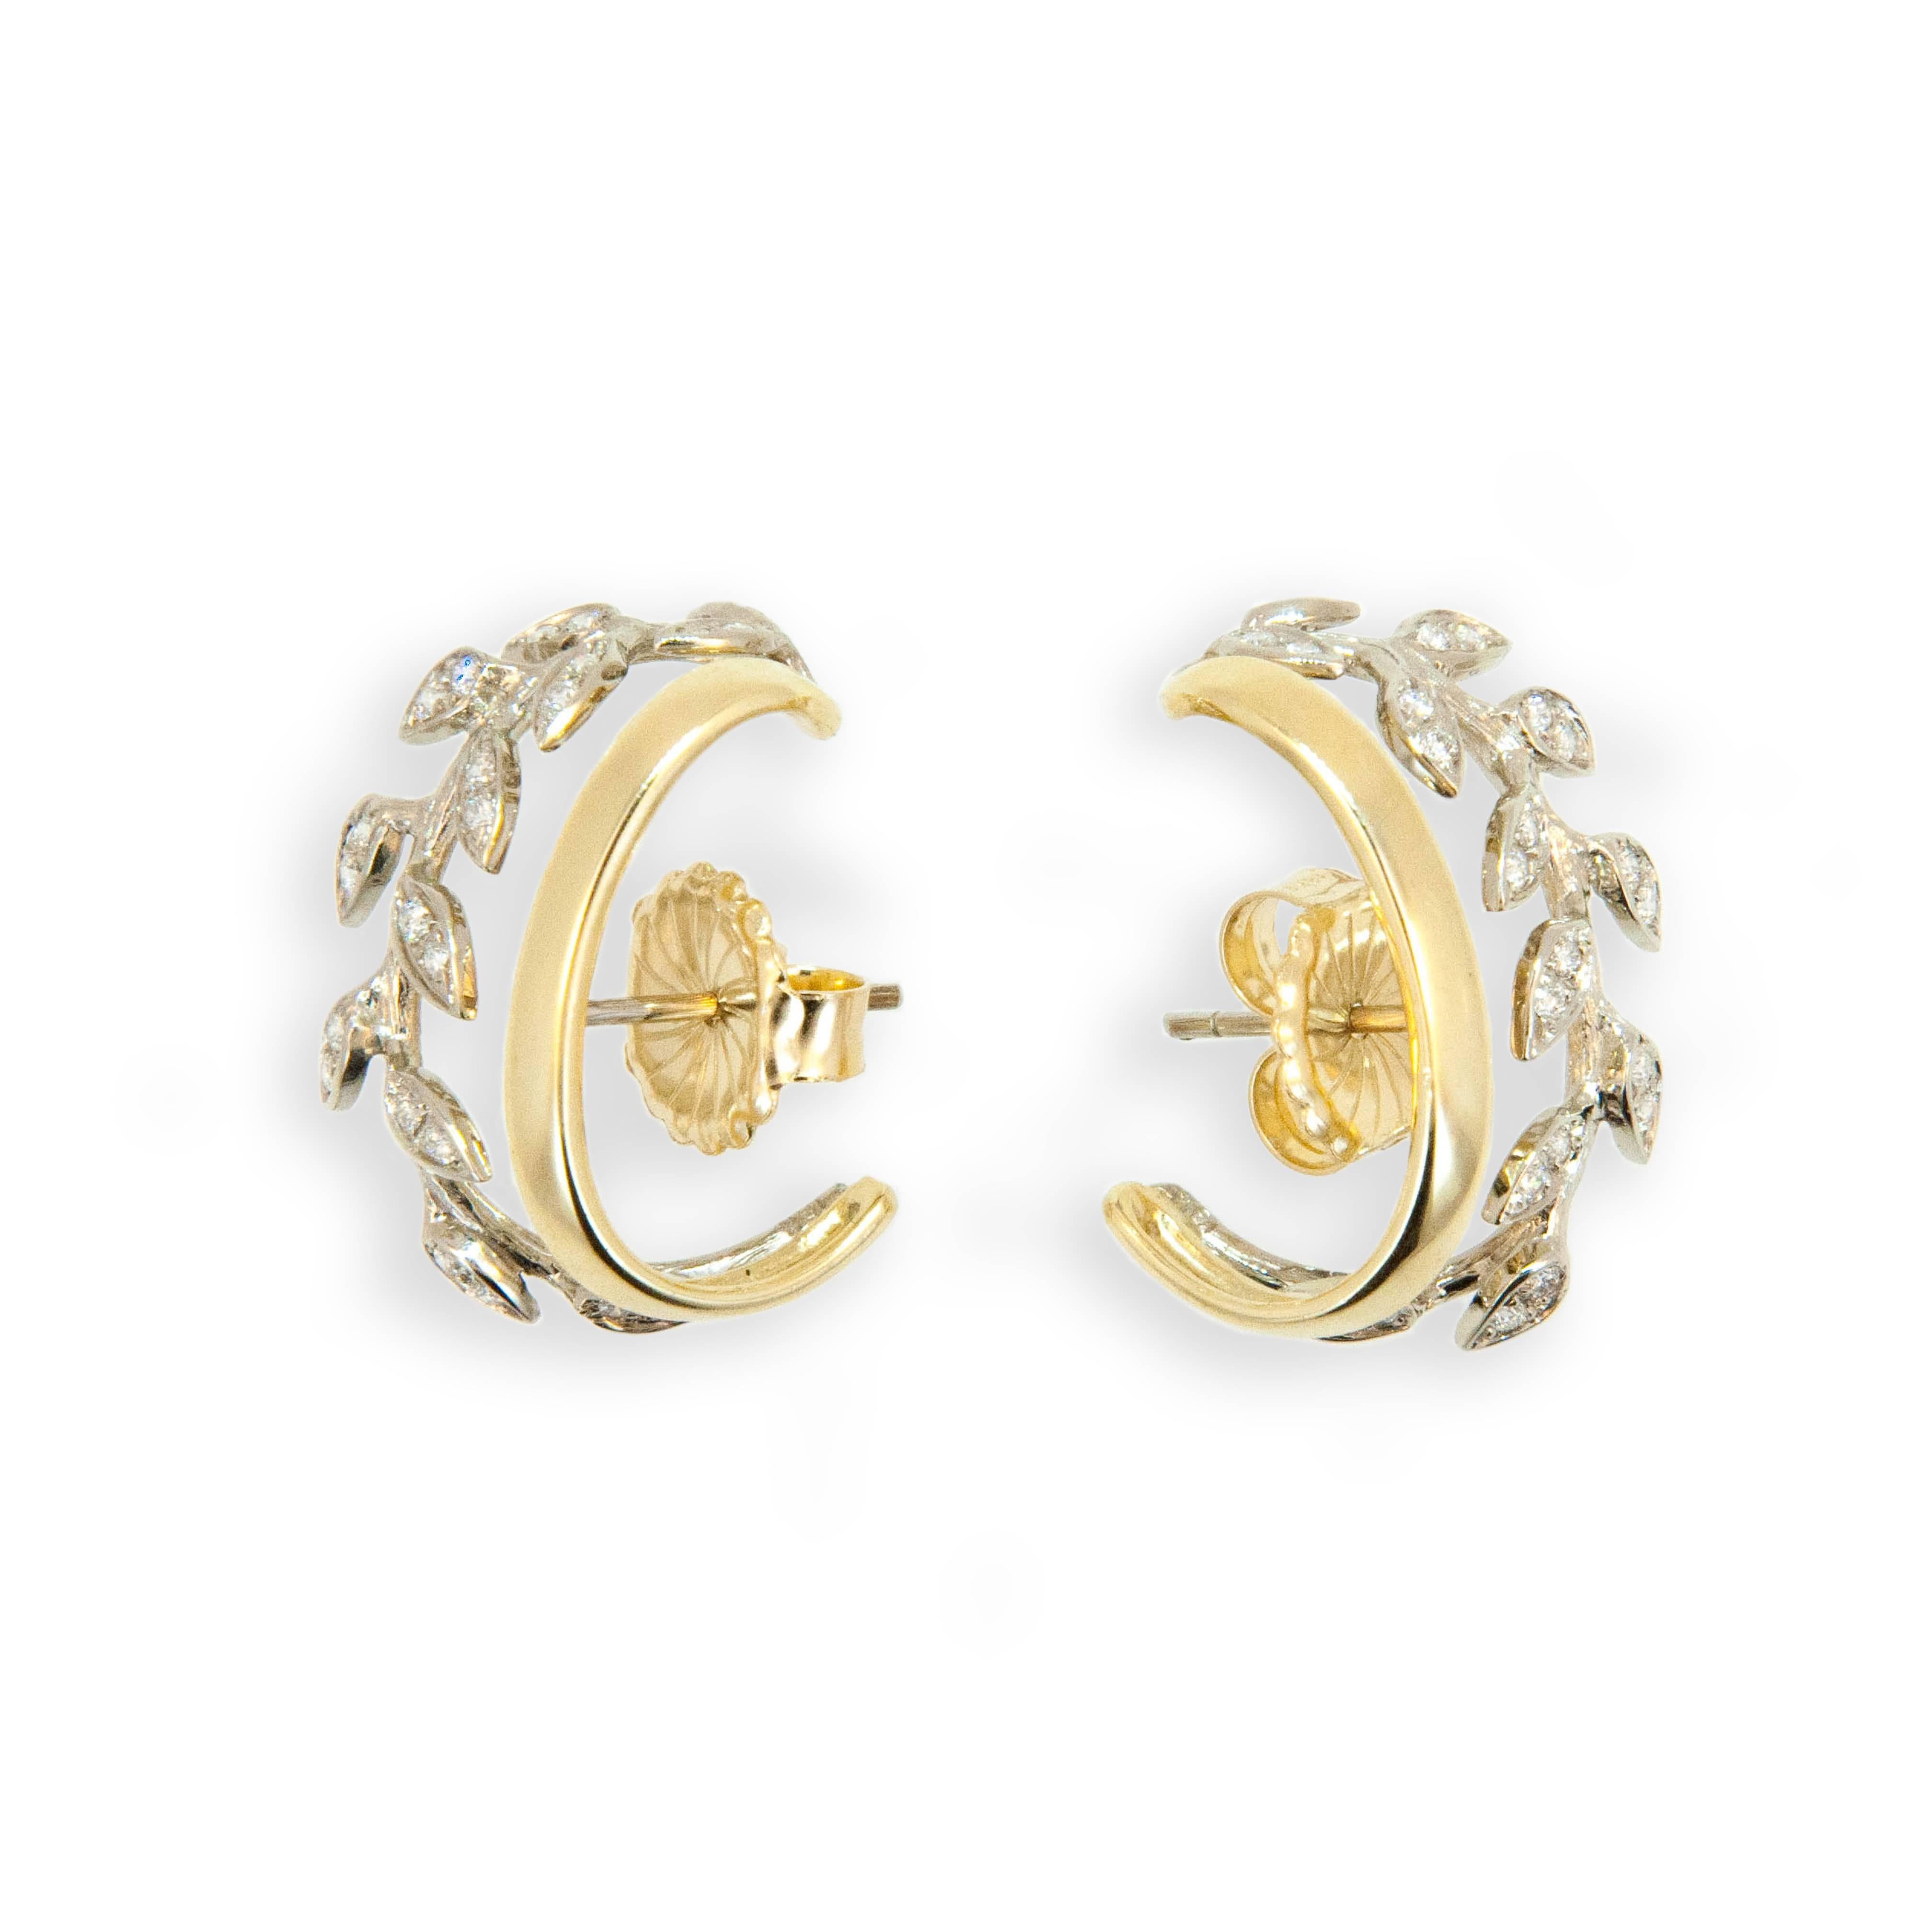 New to the Laura Munder Collection! 18 karat yellow and white gold leaf hoop earrings each set with 23 round 1.2 - 1.3 mm full cut diamonds H/SI-1 approximately .45 carat total weight. 